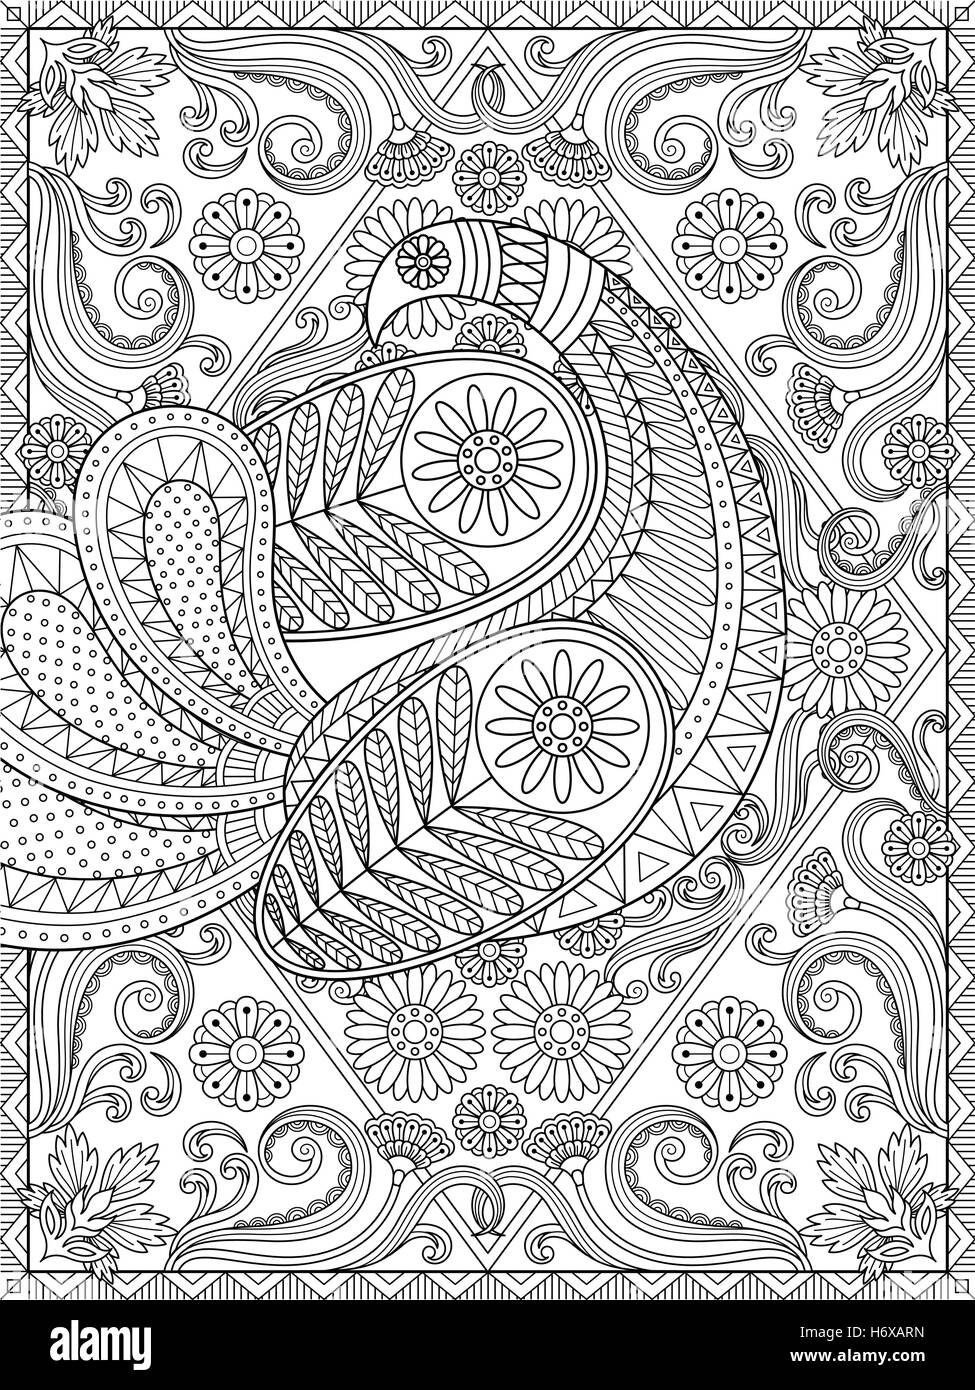 Splendid adult coloring page, elegant peacock is showing off its feather, floral and geometric elements, stress relief coloring  Stock Vector